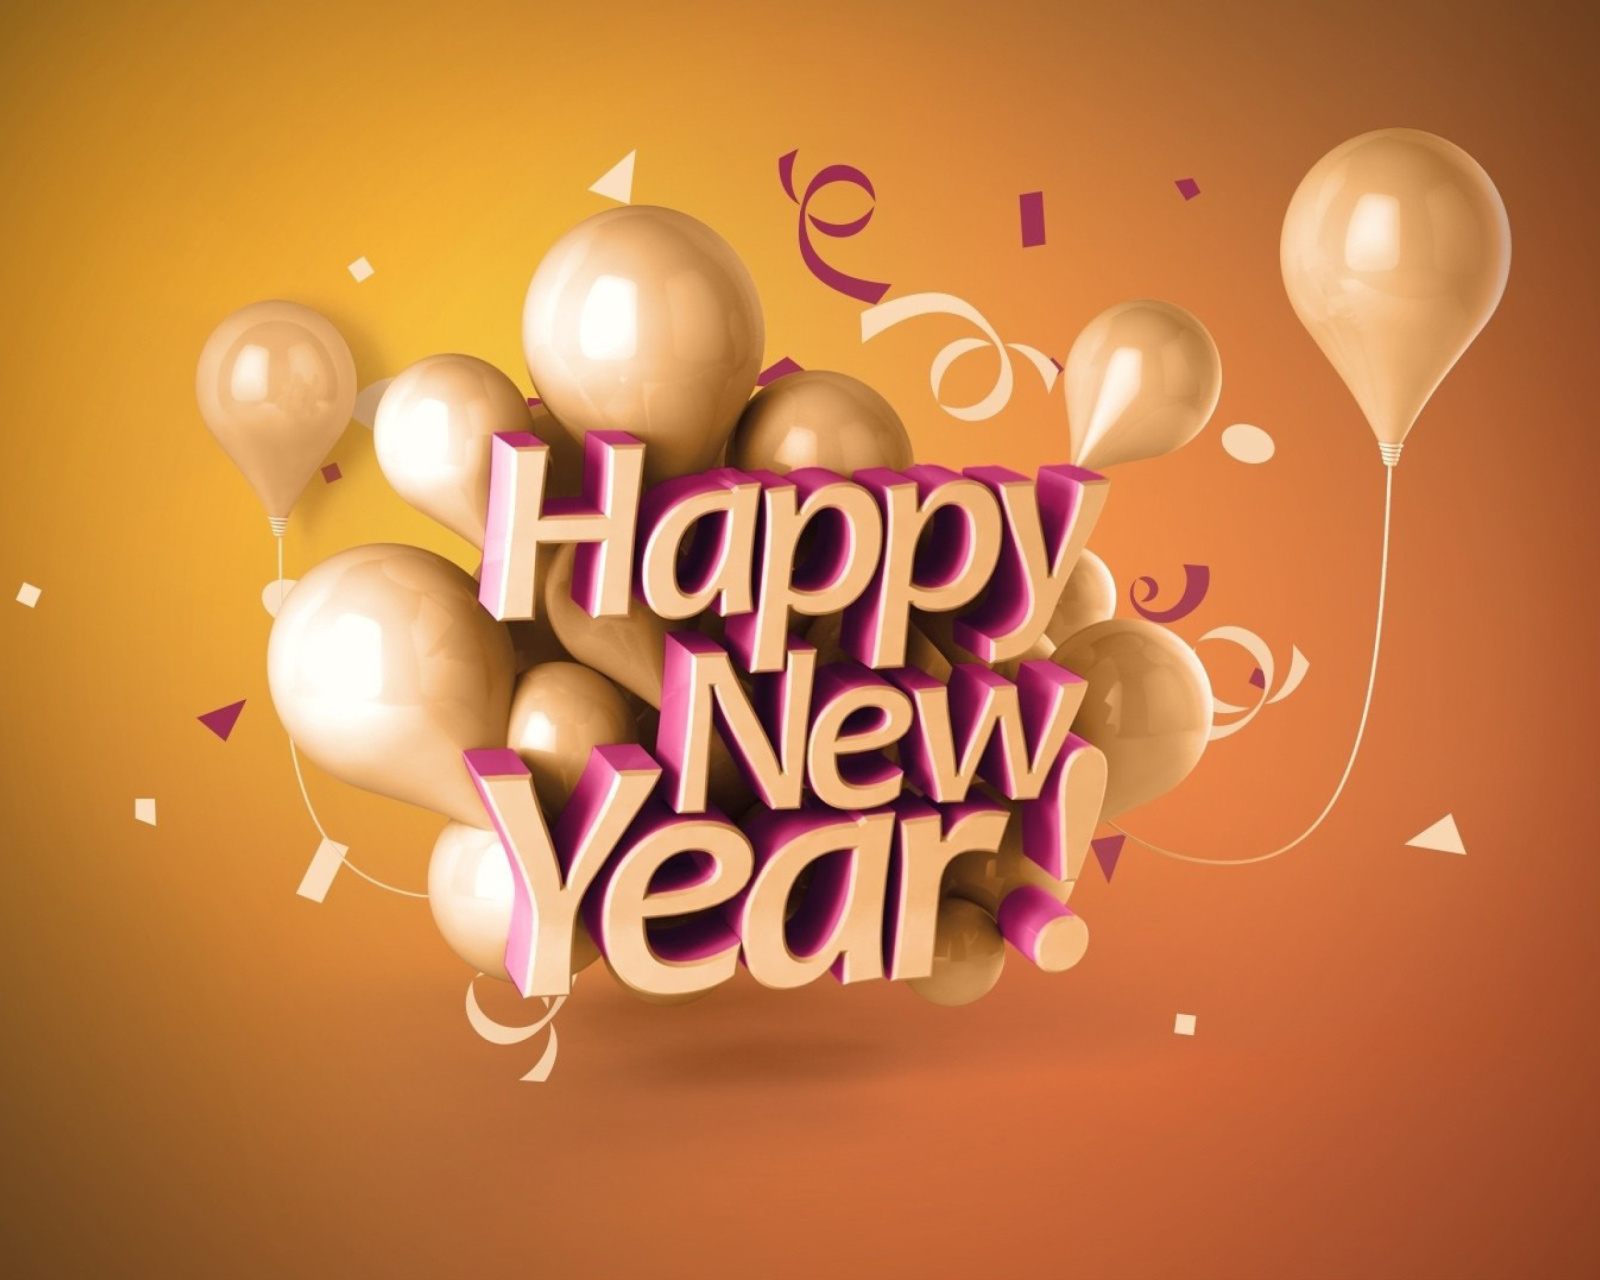 Happy New Year Good Luck Quote wallpaper 1600x1280